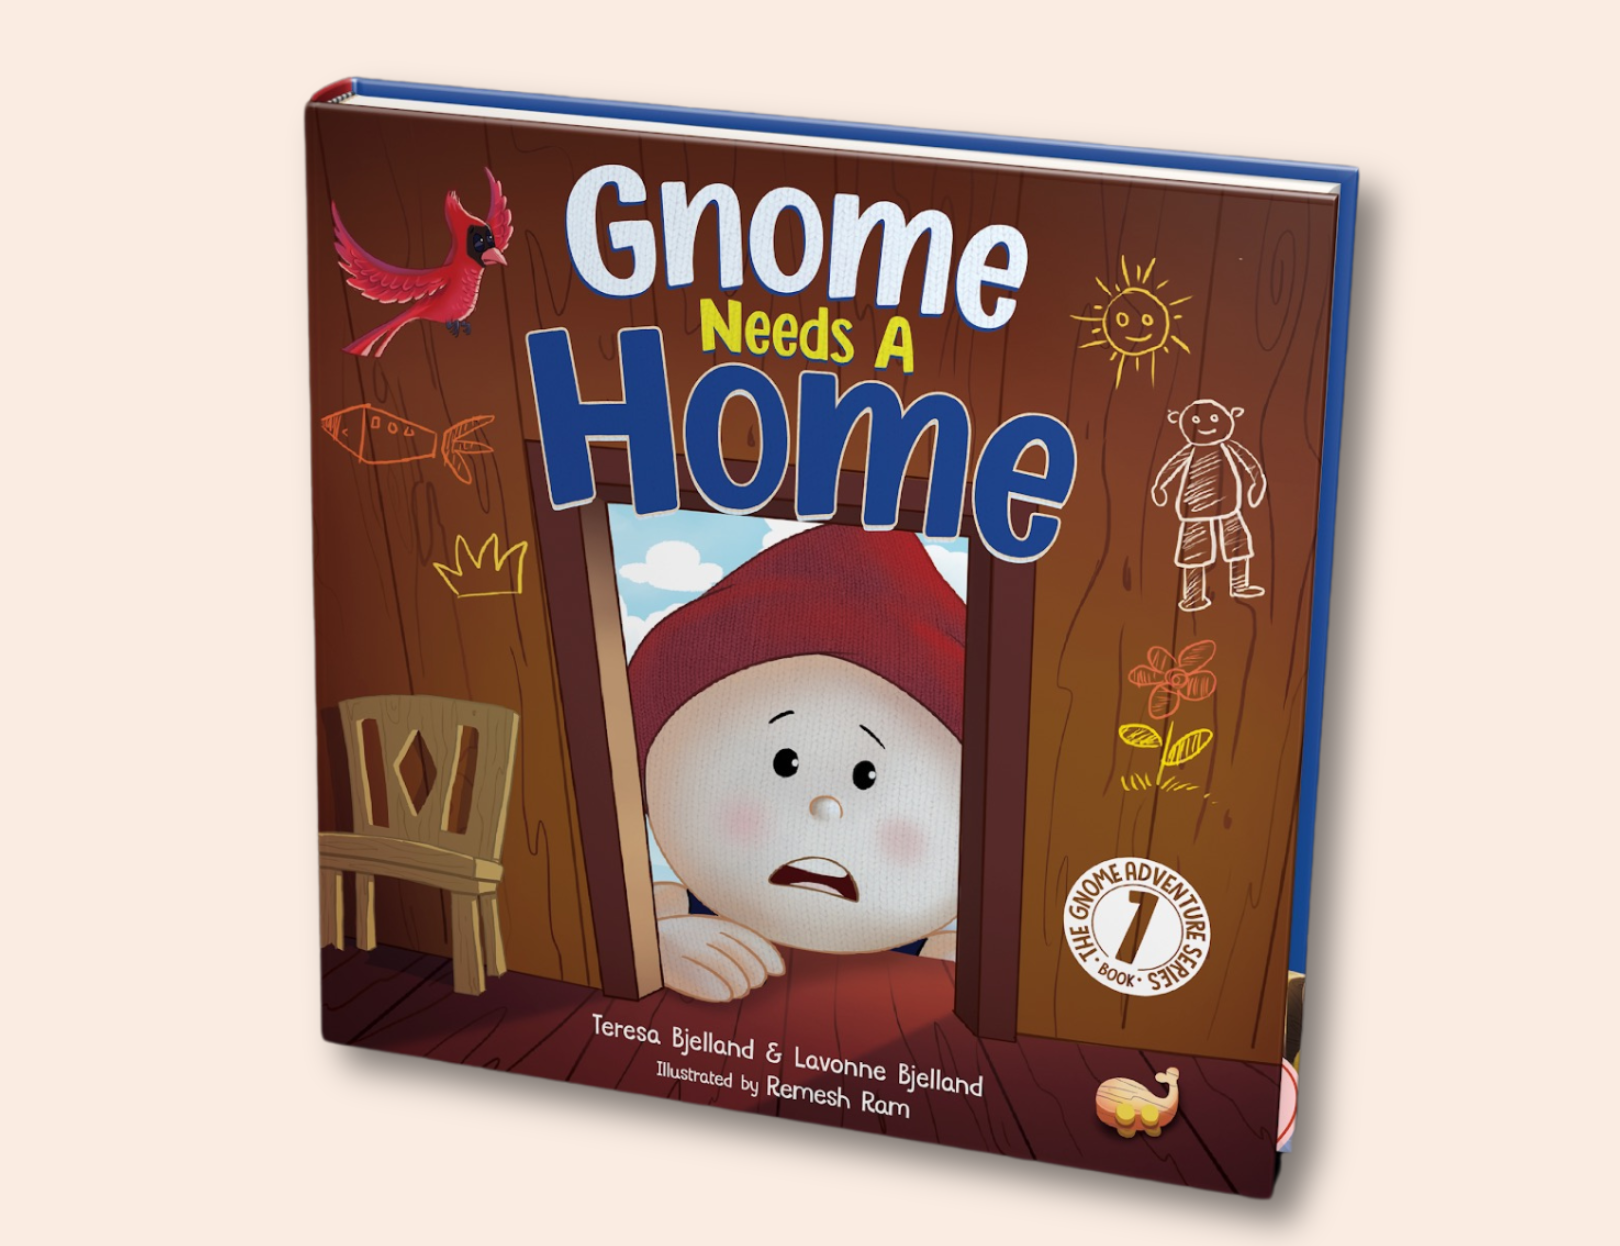  An image of a children's book titled "Gnome Needs A Home" from The Uff Da Sisters, part of the Gnome Adventures series. The cover features a worried-looking gnome peeking out from a wooden door, with whimsical drawings such as a bird and doodles of a sun and a gnome on the door. The authors' names, Teresa Bjelland & Lavonne Bjelland, are displayed at the bottom, with an illustration credit to Ramesh Ram. There's a badge on the bottom right indicating that it is book 1 in a series.